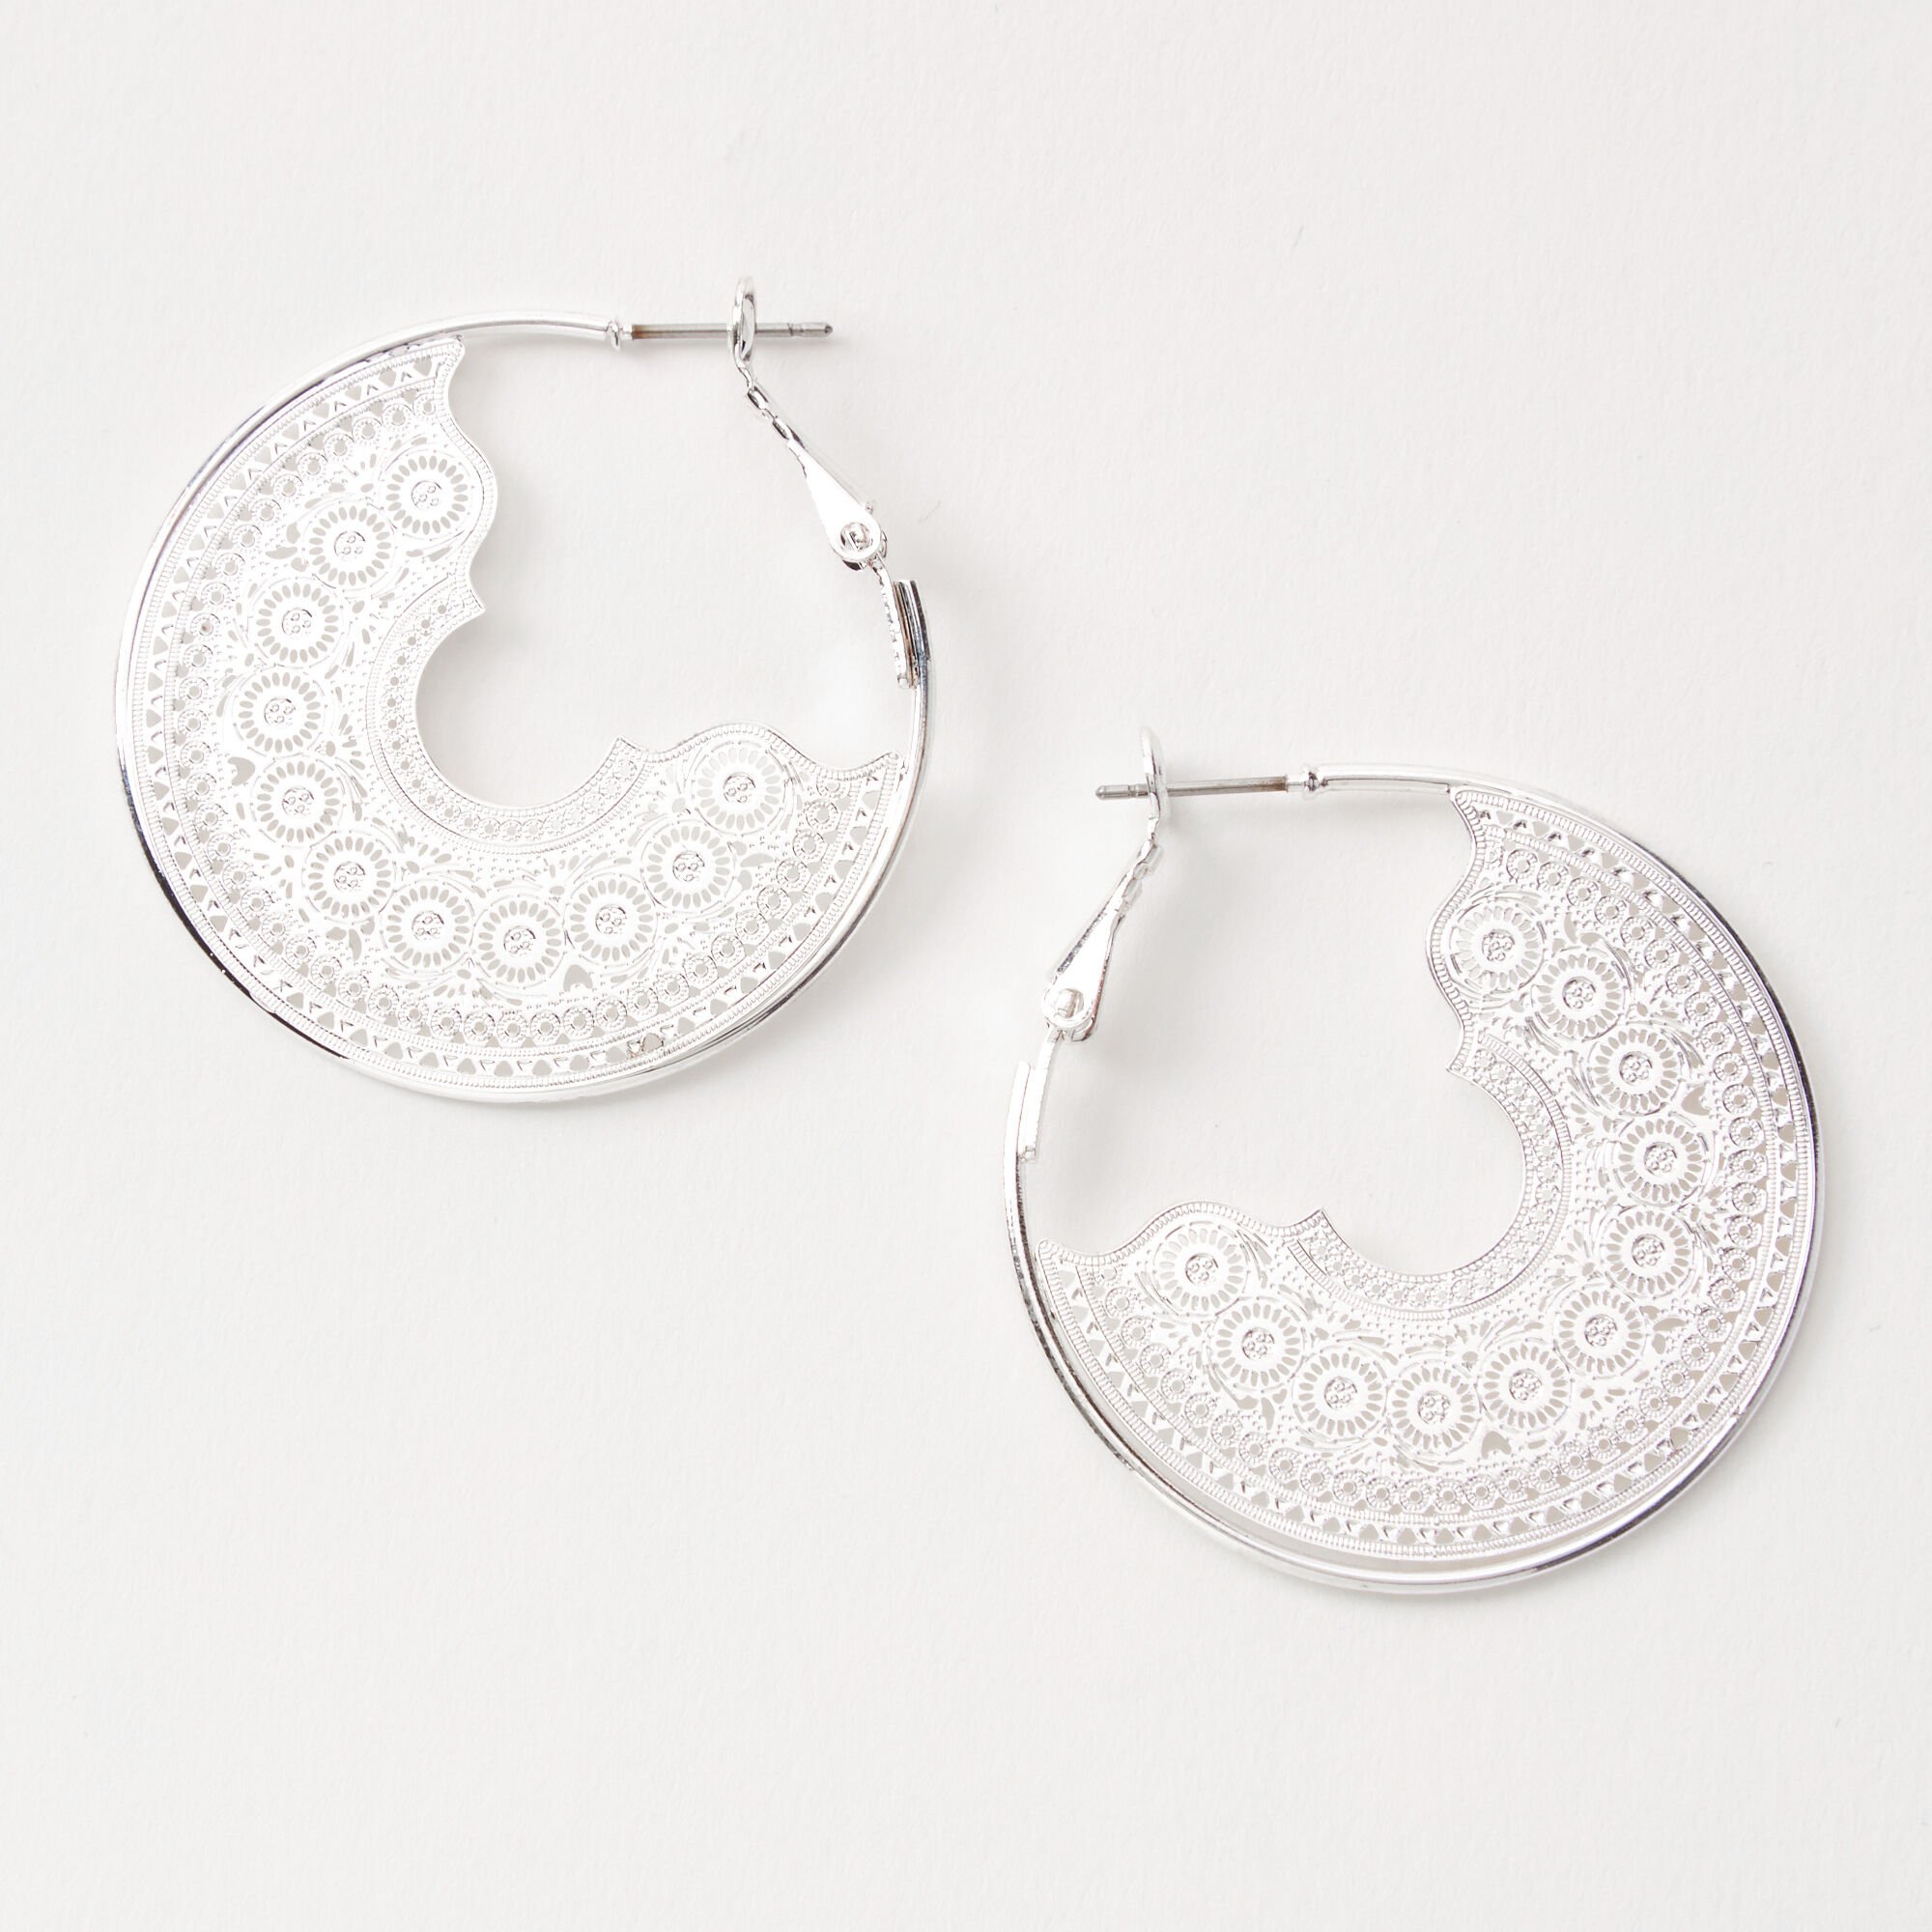 View Claires Tone 40MM Delicate Filigree Hoop Earrings Silver information